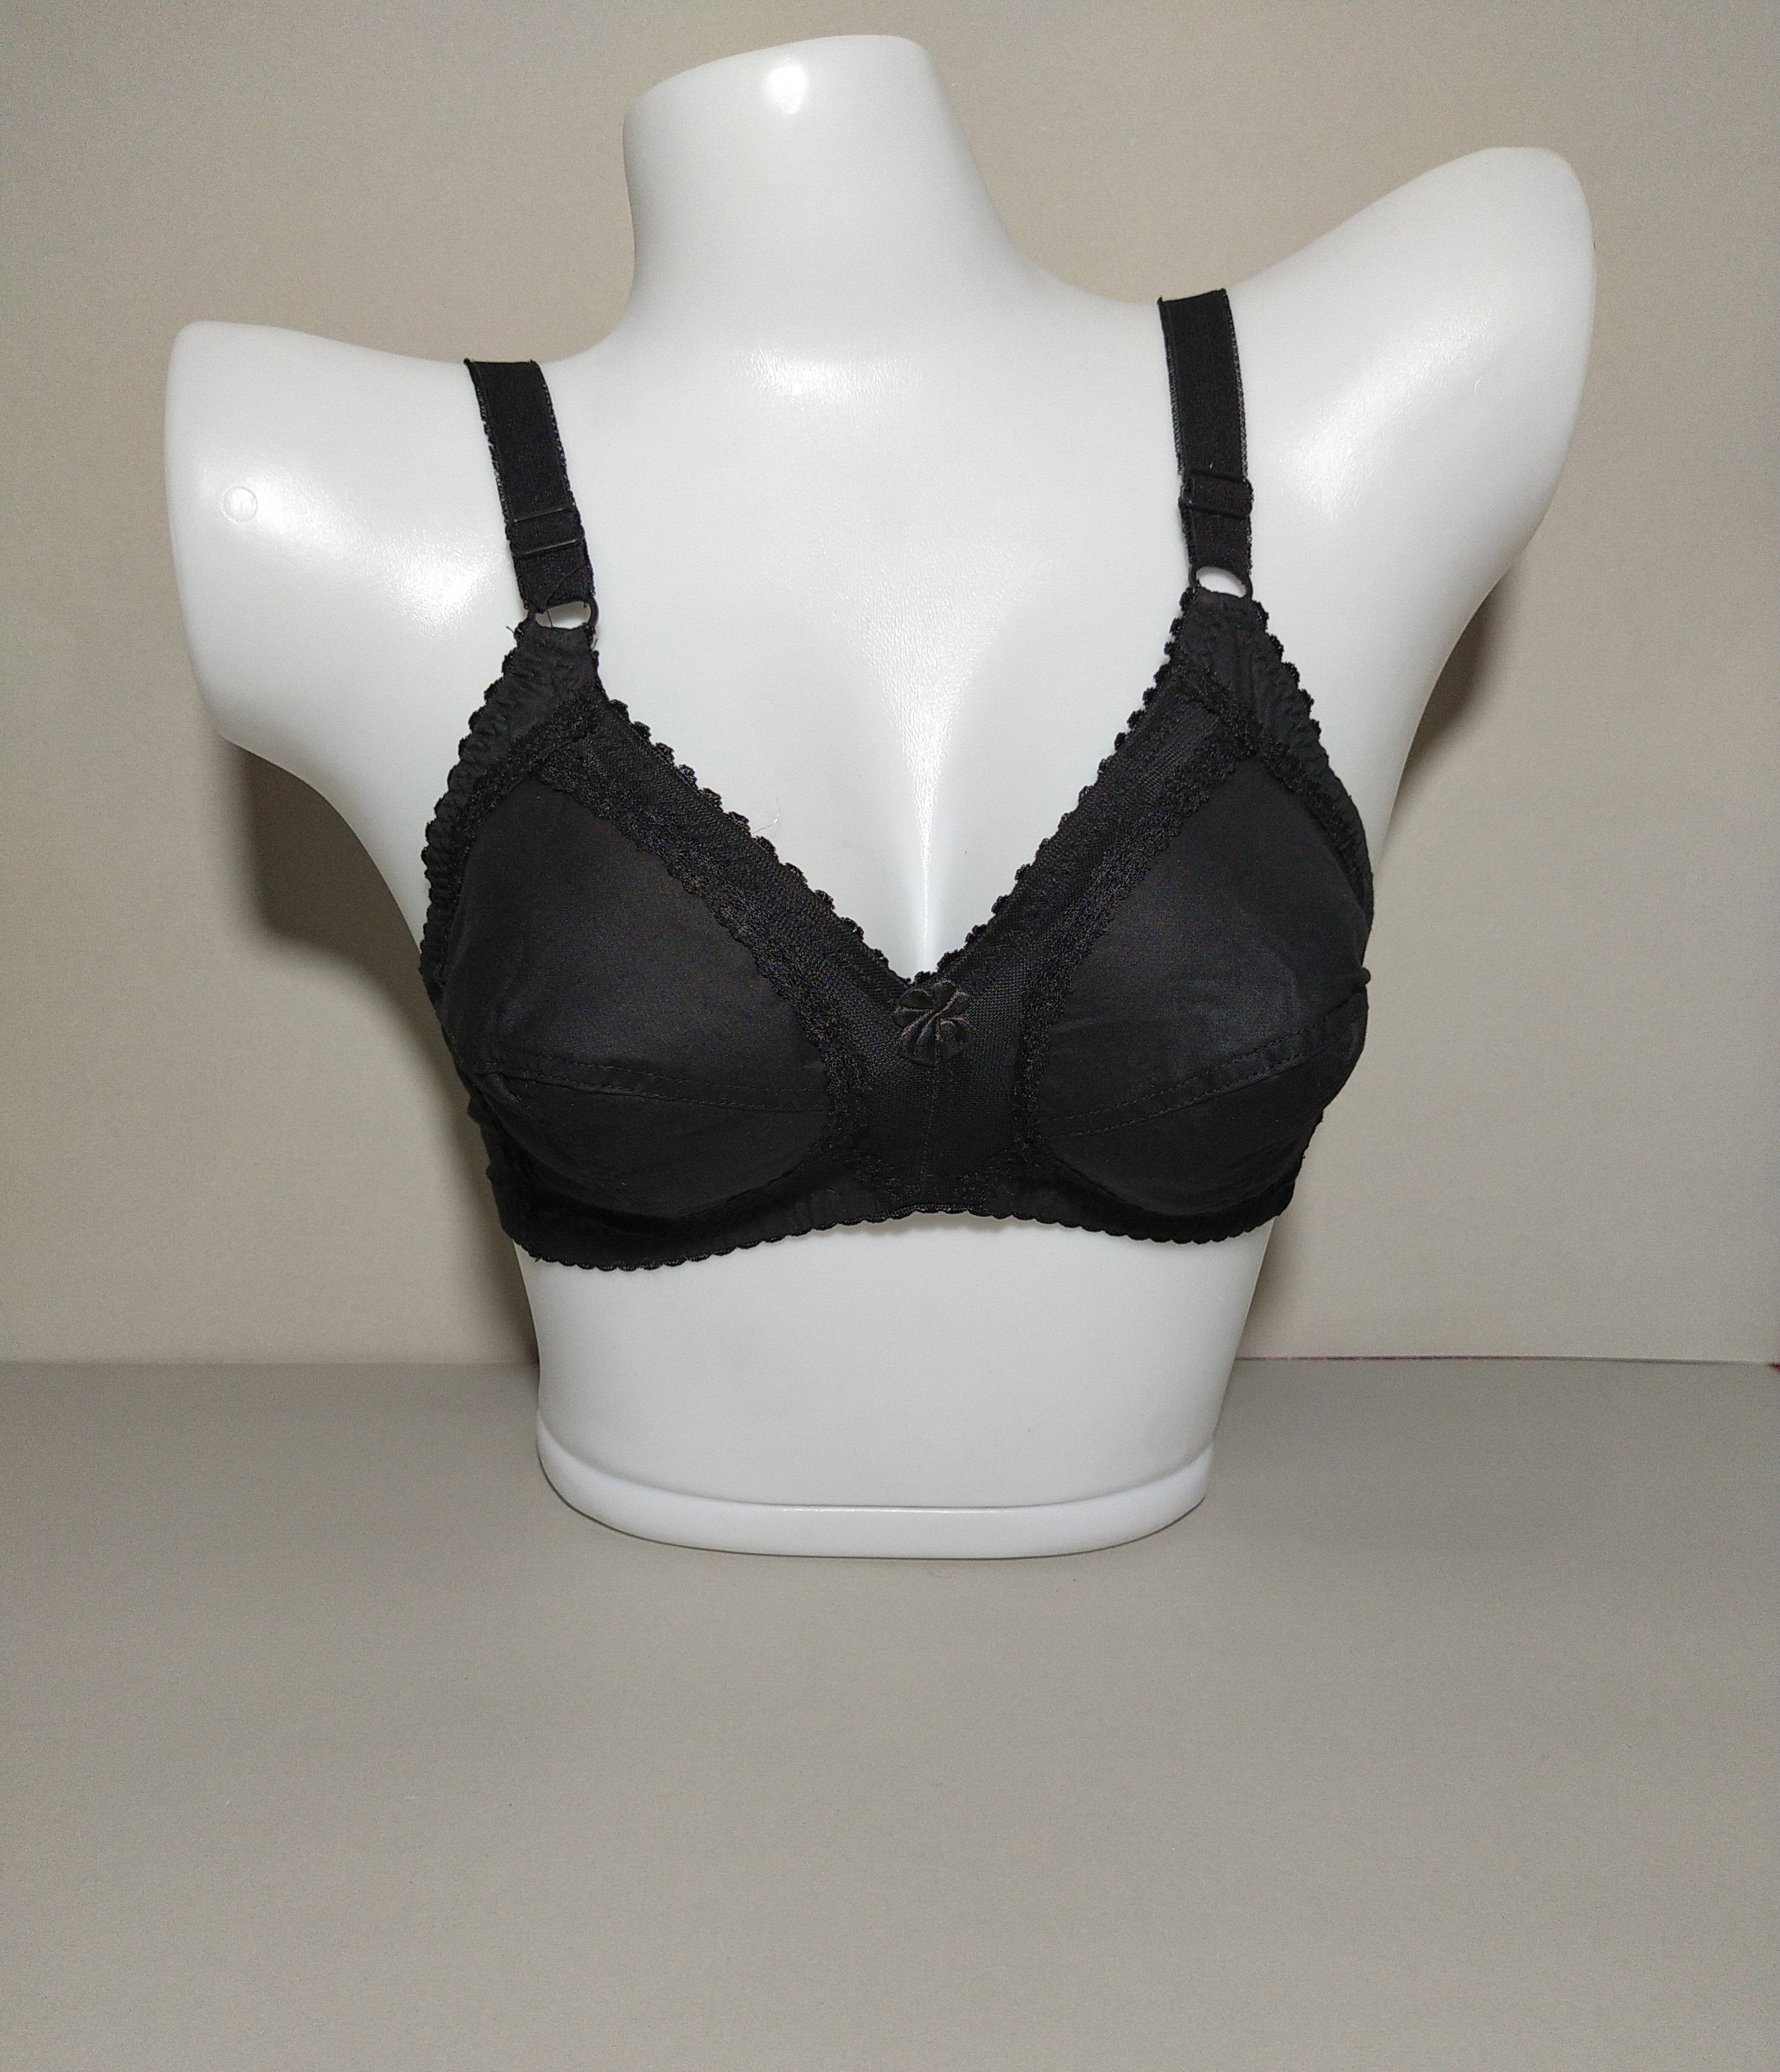 Cotton Net Non-Padded Ladies Fancy Black Bra, for Daily Wear at Rs